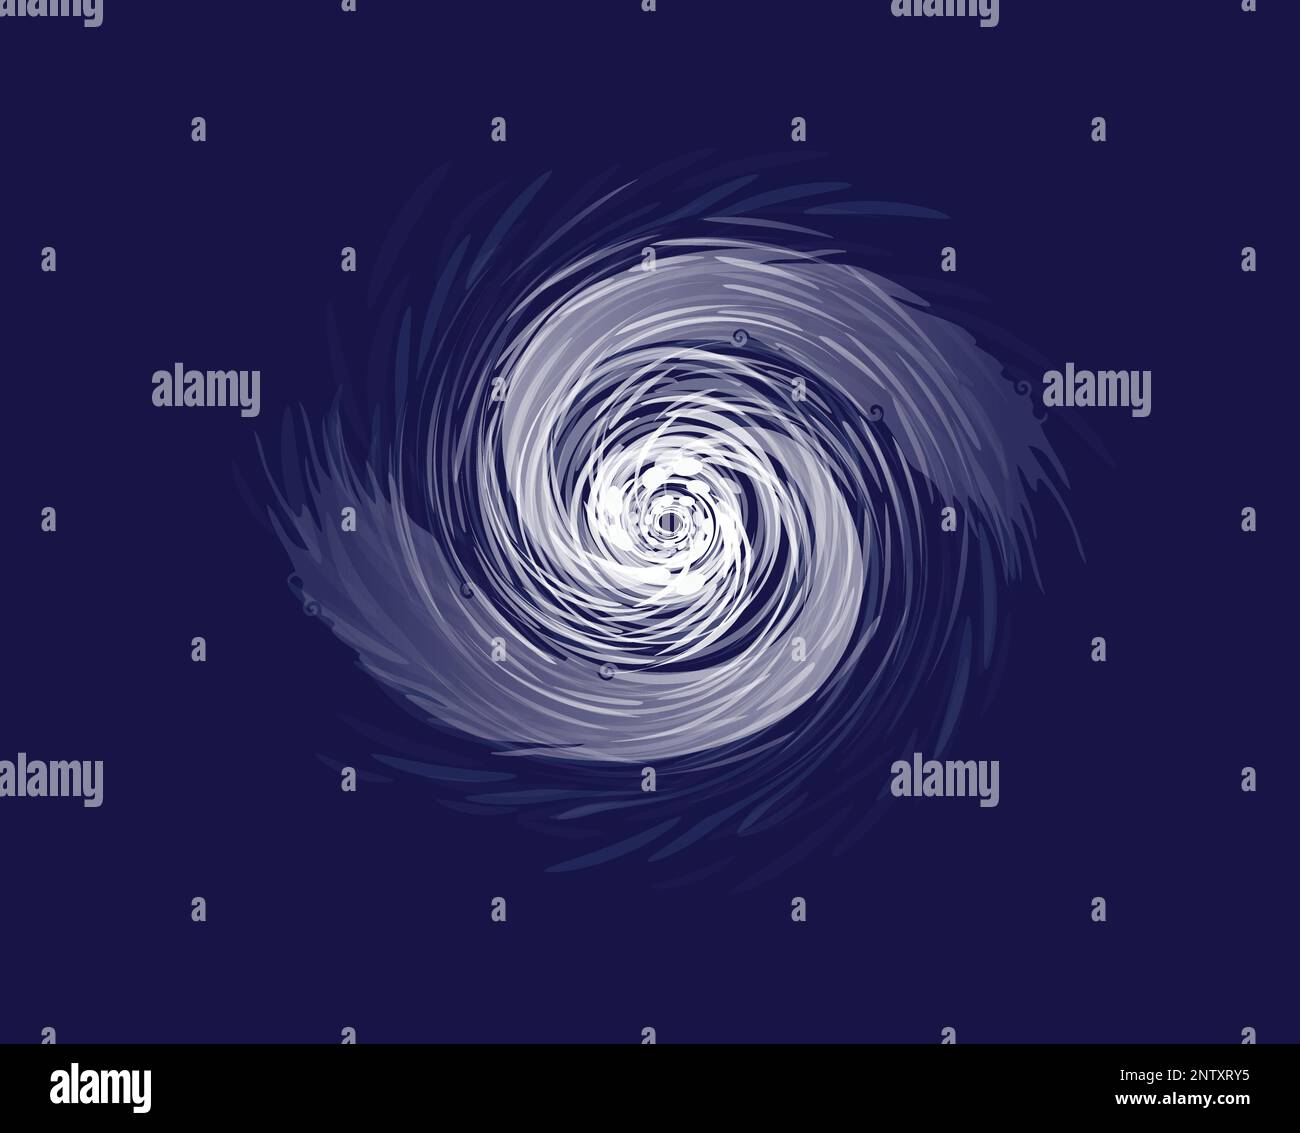 Hurricane funnel. Cyclonic weather whirlpool of climatic vortices Stock Vector